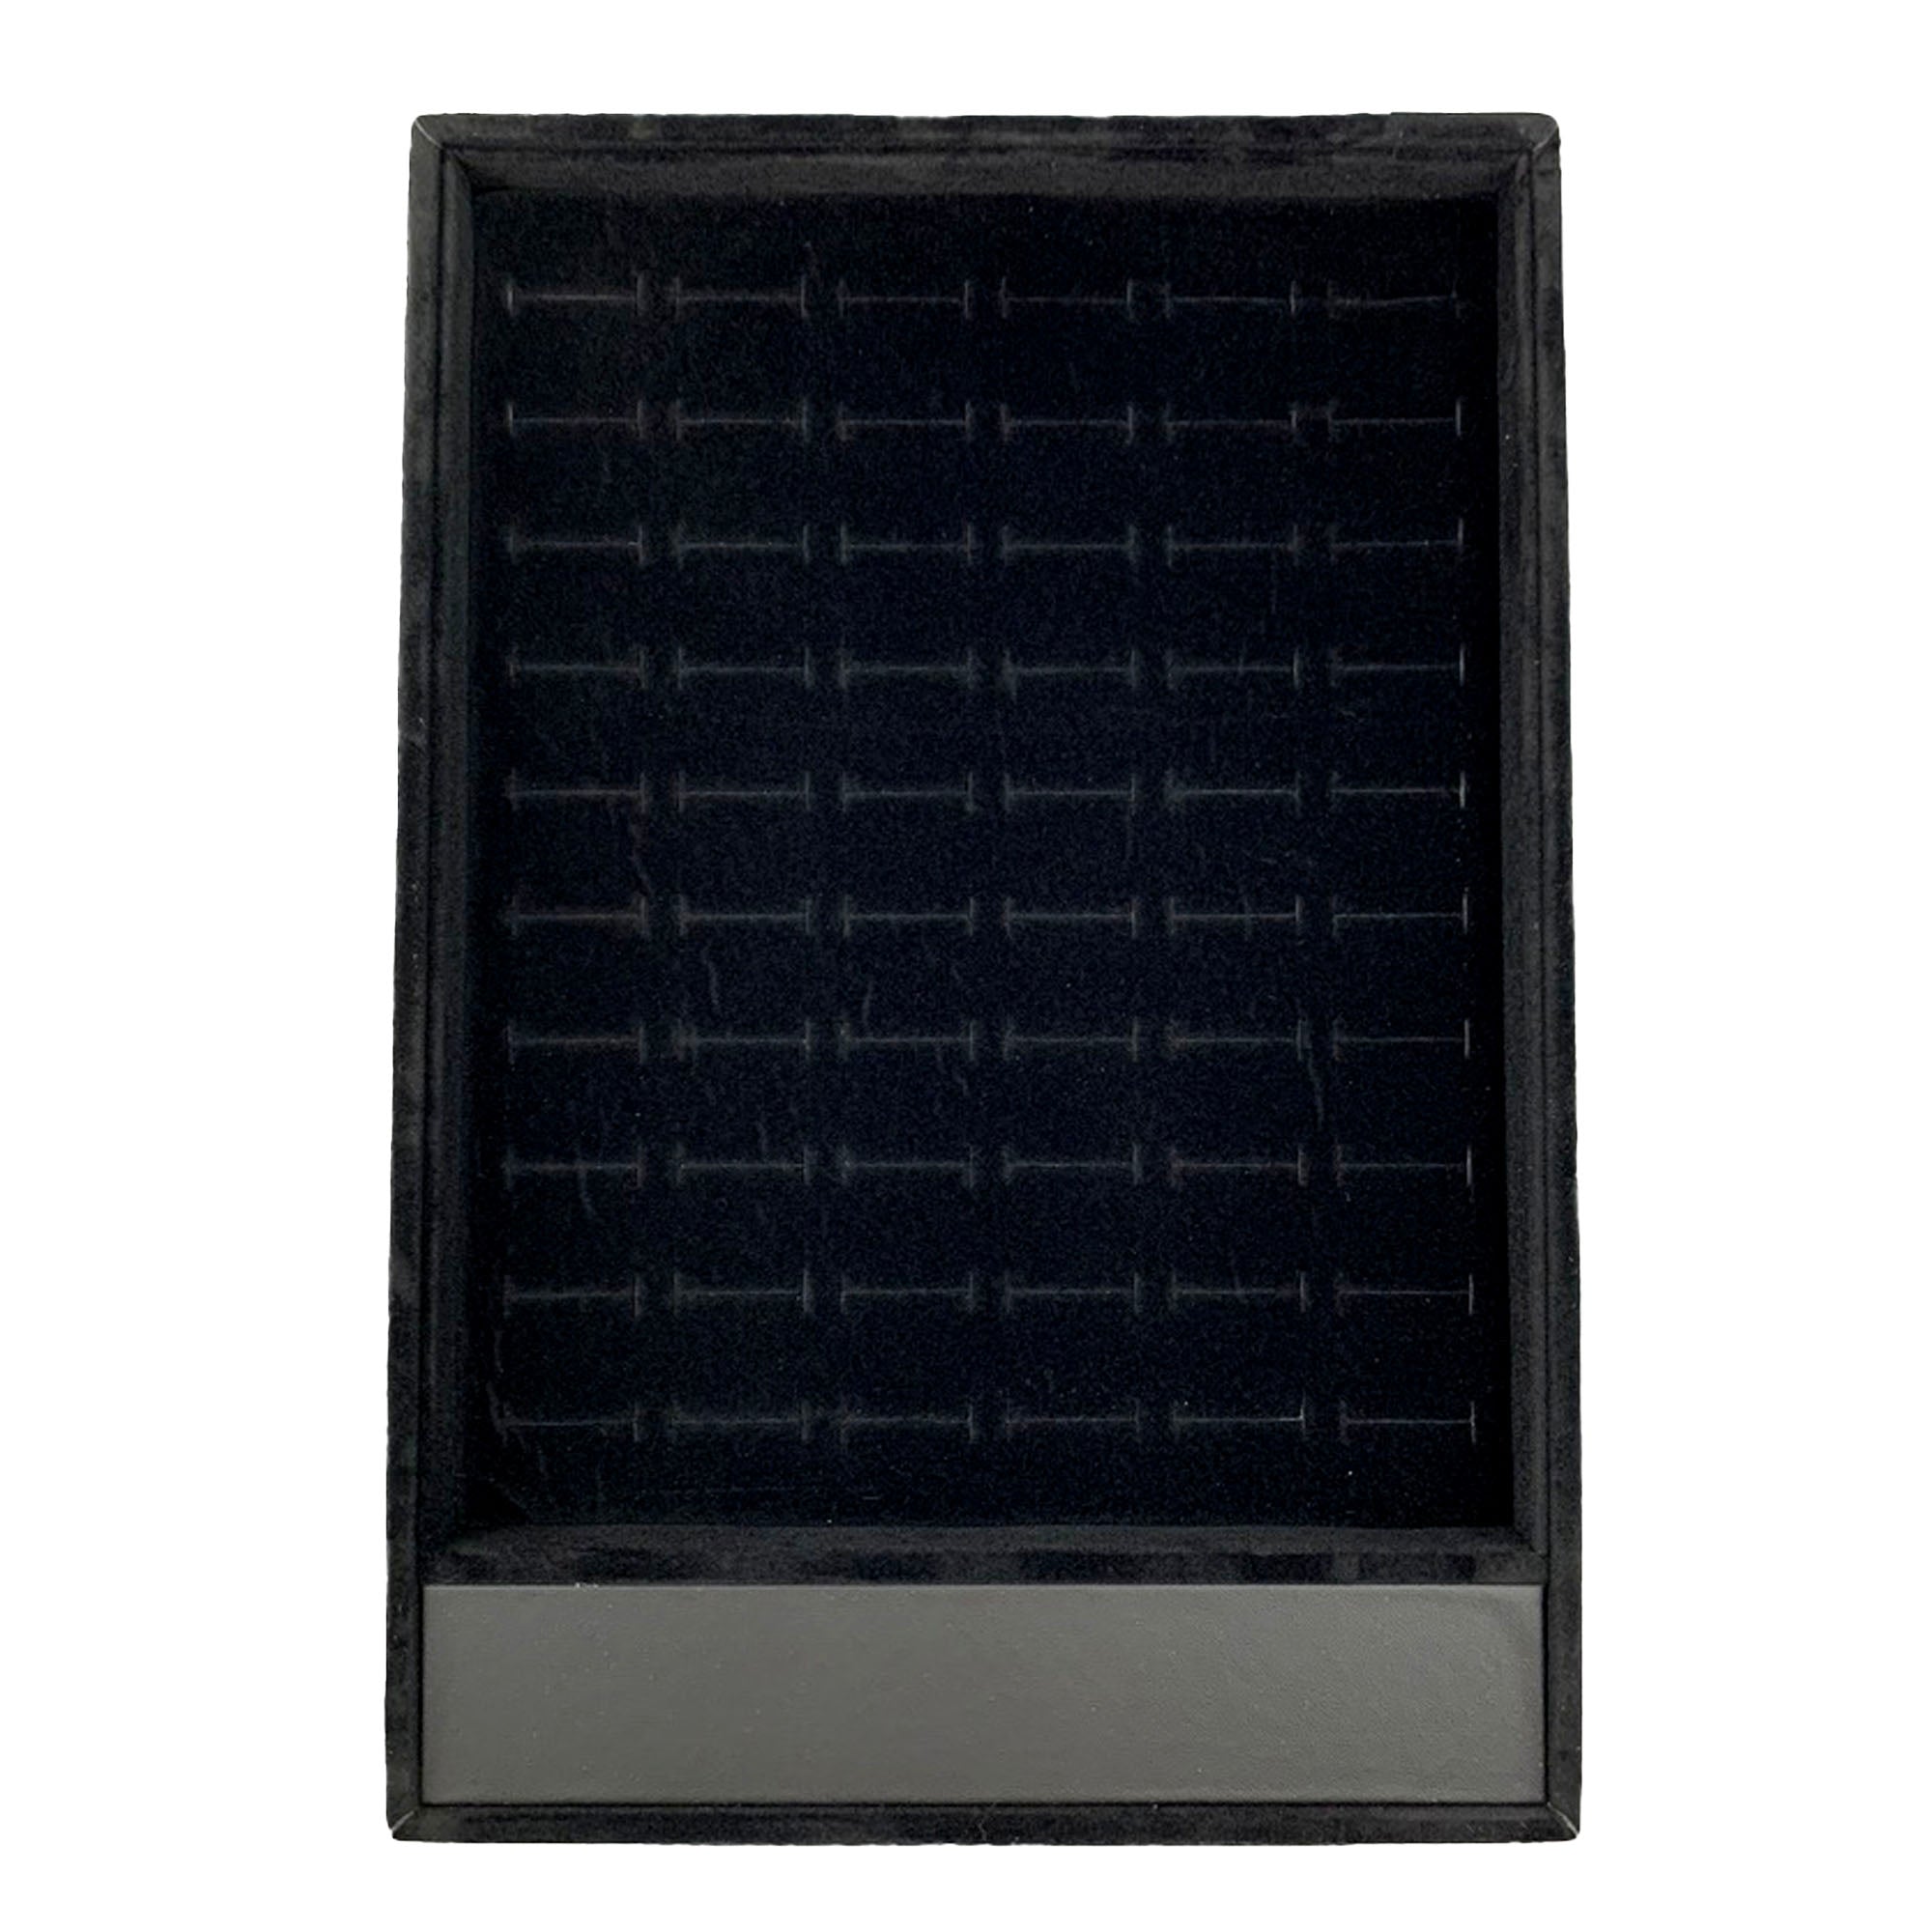 60 Slotted Black Ring Display Tray / DSP0001-0 Slotted Black Ring Display Tray - Ring Case for 24 Rings - Black